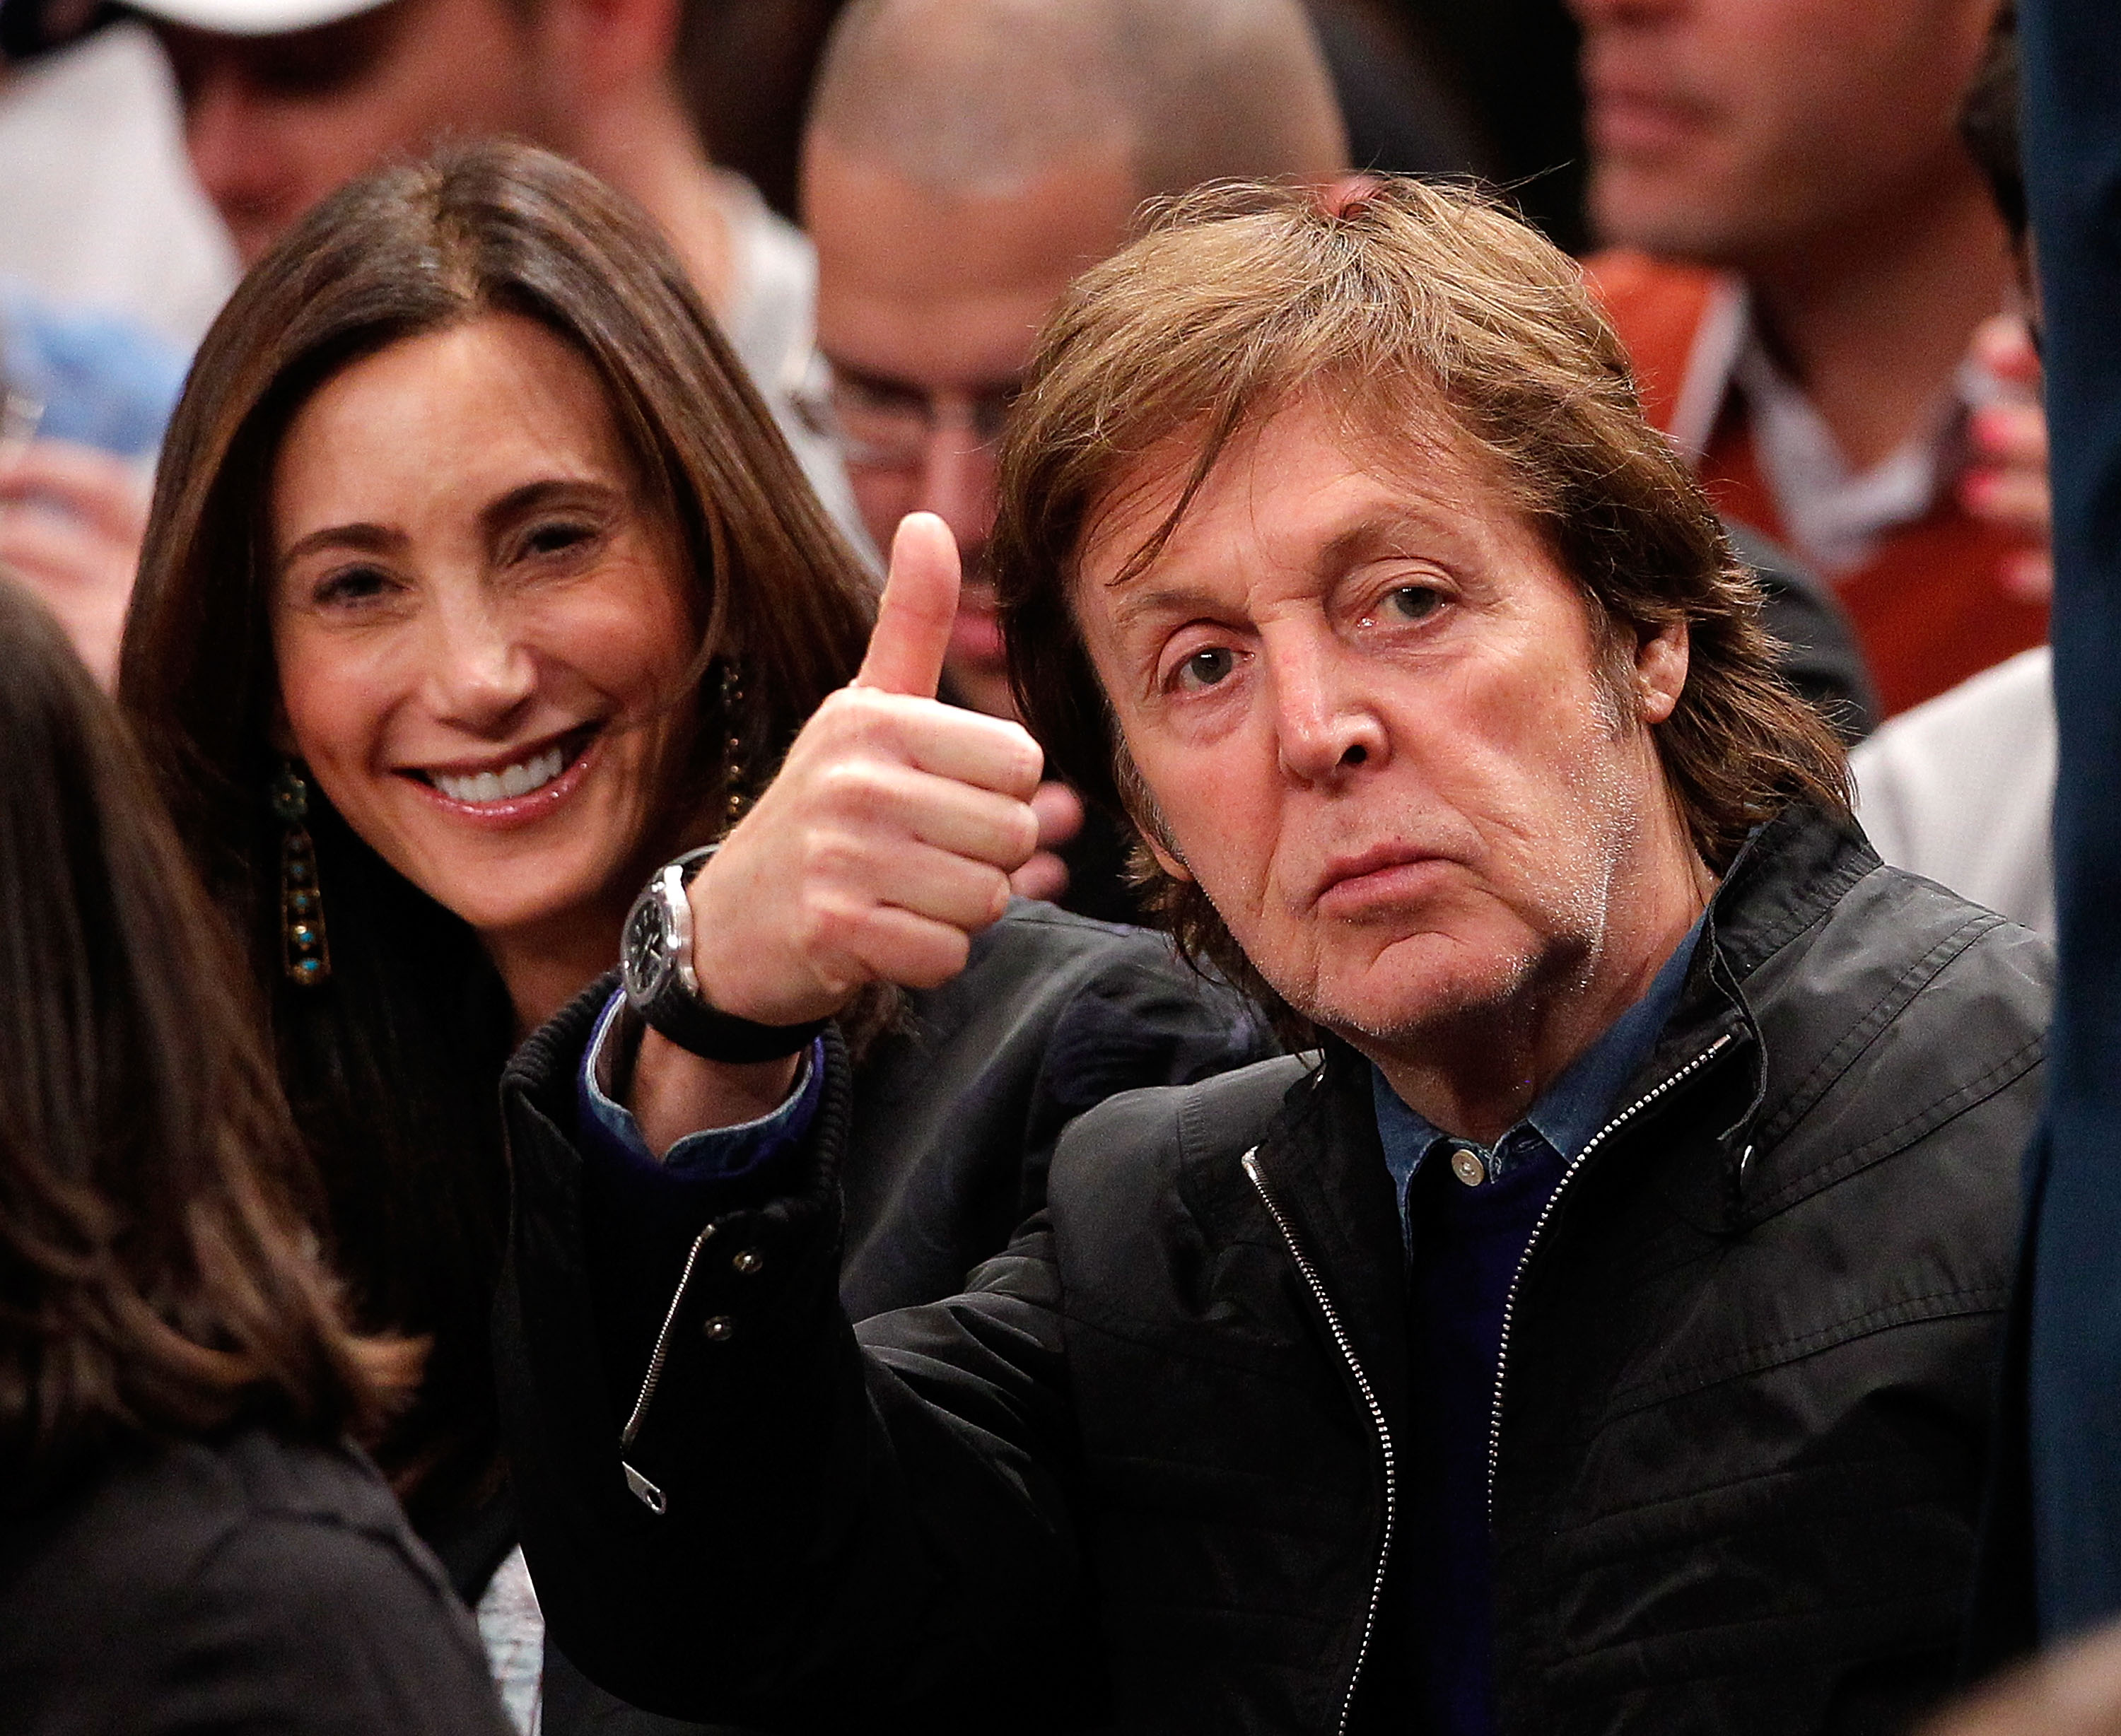 Paul McCartney gives a thumbs up to fans as his wife Nancy Shevell smiles during an NBA basketball game at Madison Square Garden in New York City, on February 17, 2012. | Source: Getty Images